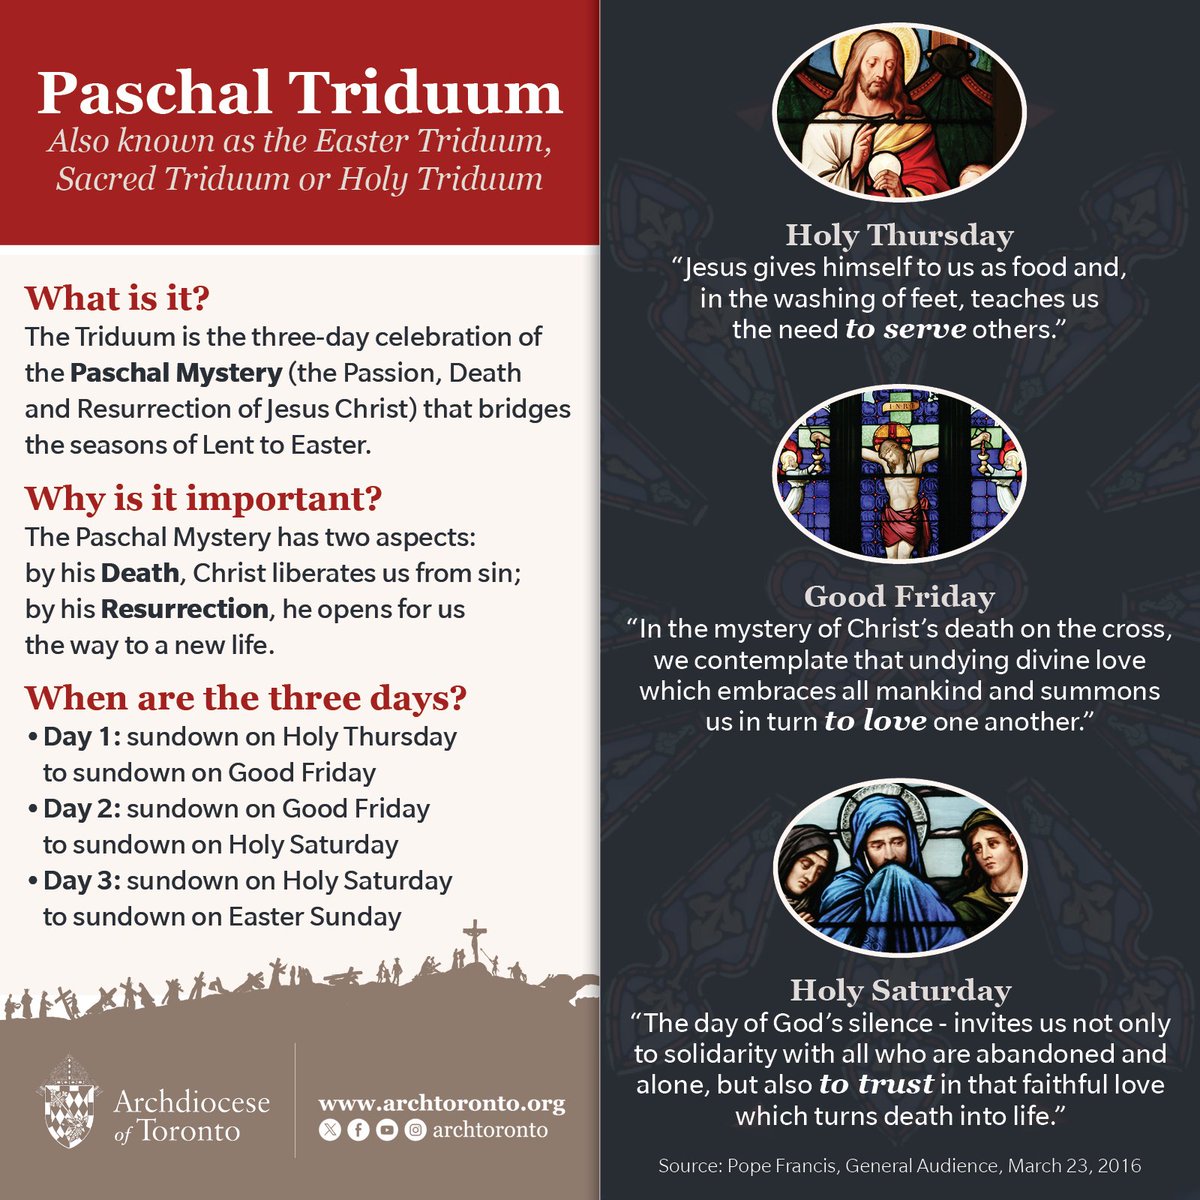 The Paschal #Triduum is the three-day celebration of the Passion, Death and Resurrection of Jesus Christ that begins on #HolyThursday.